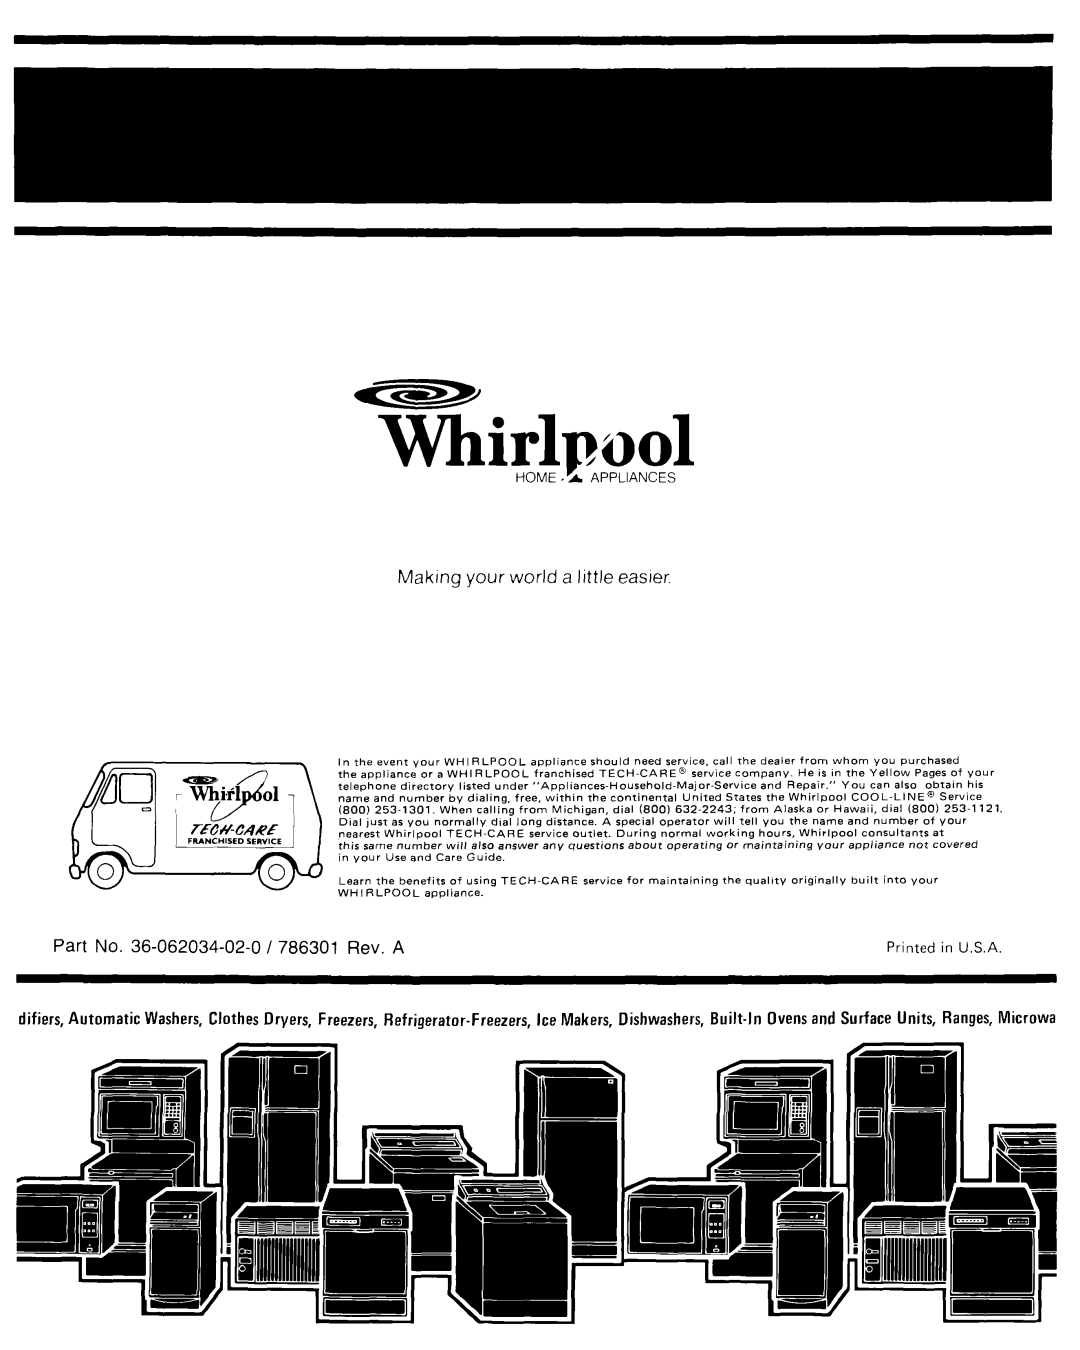 Whirlpool Microwave Oven manual Whirlpool, Maklng your world a little easier, Part No. 36-062034-02-o /786301 Rev. A 